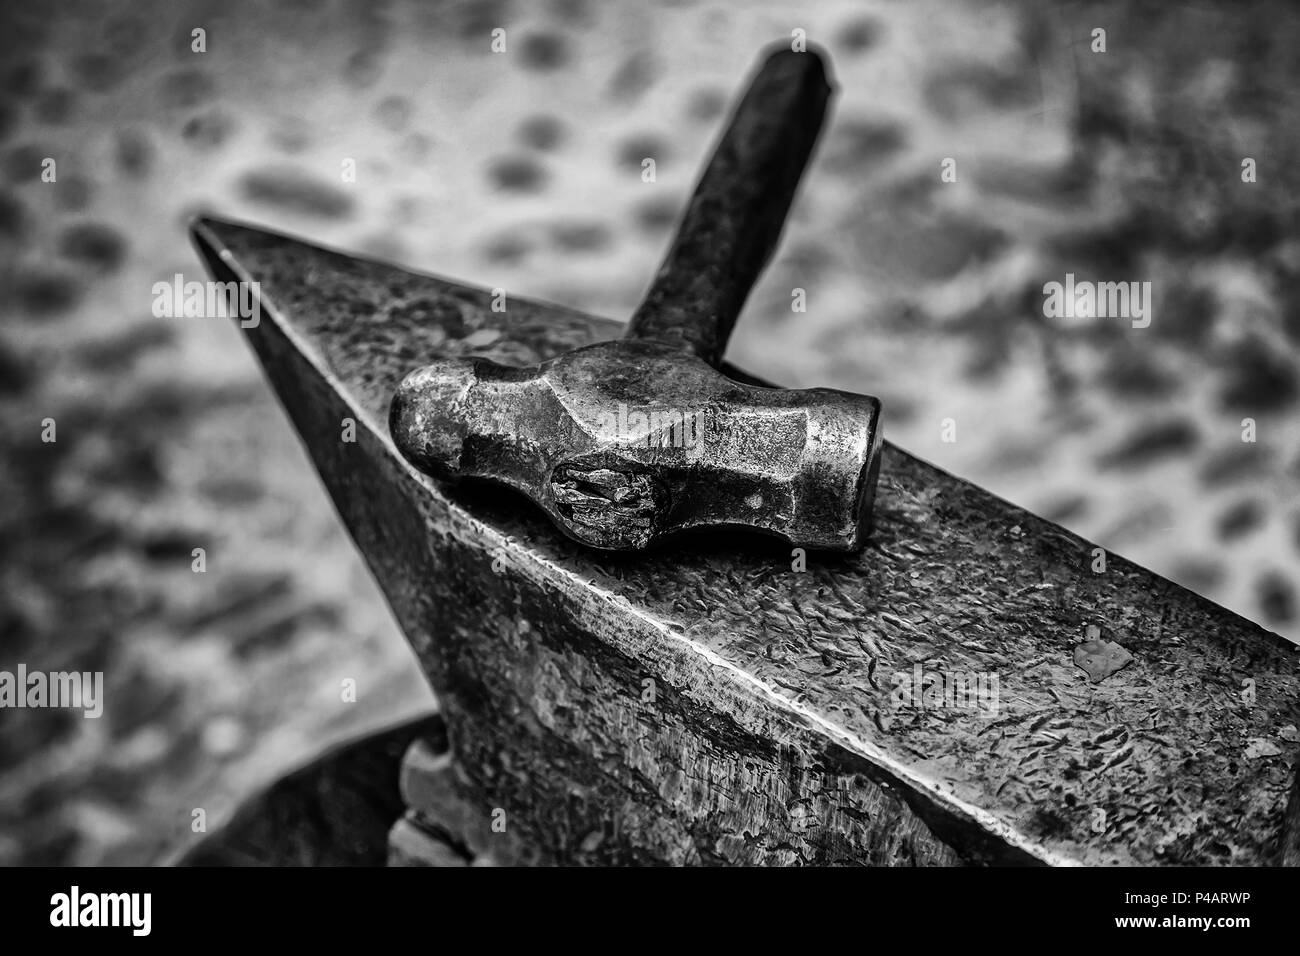 Hammer and anvil, detail of a forge, metal herramienas Stock Photo